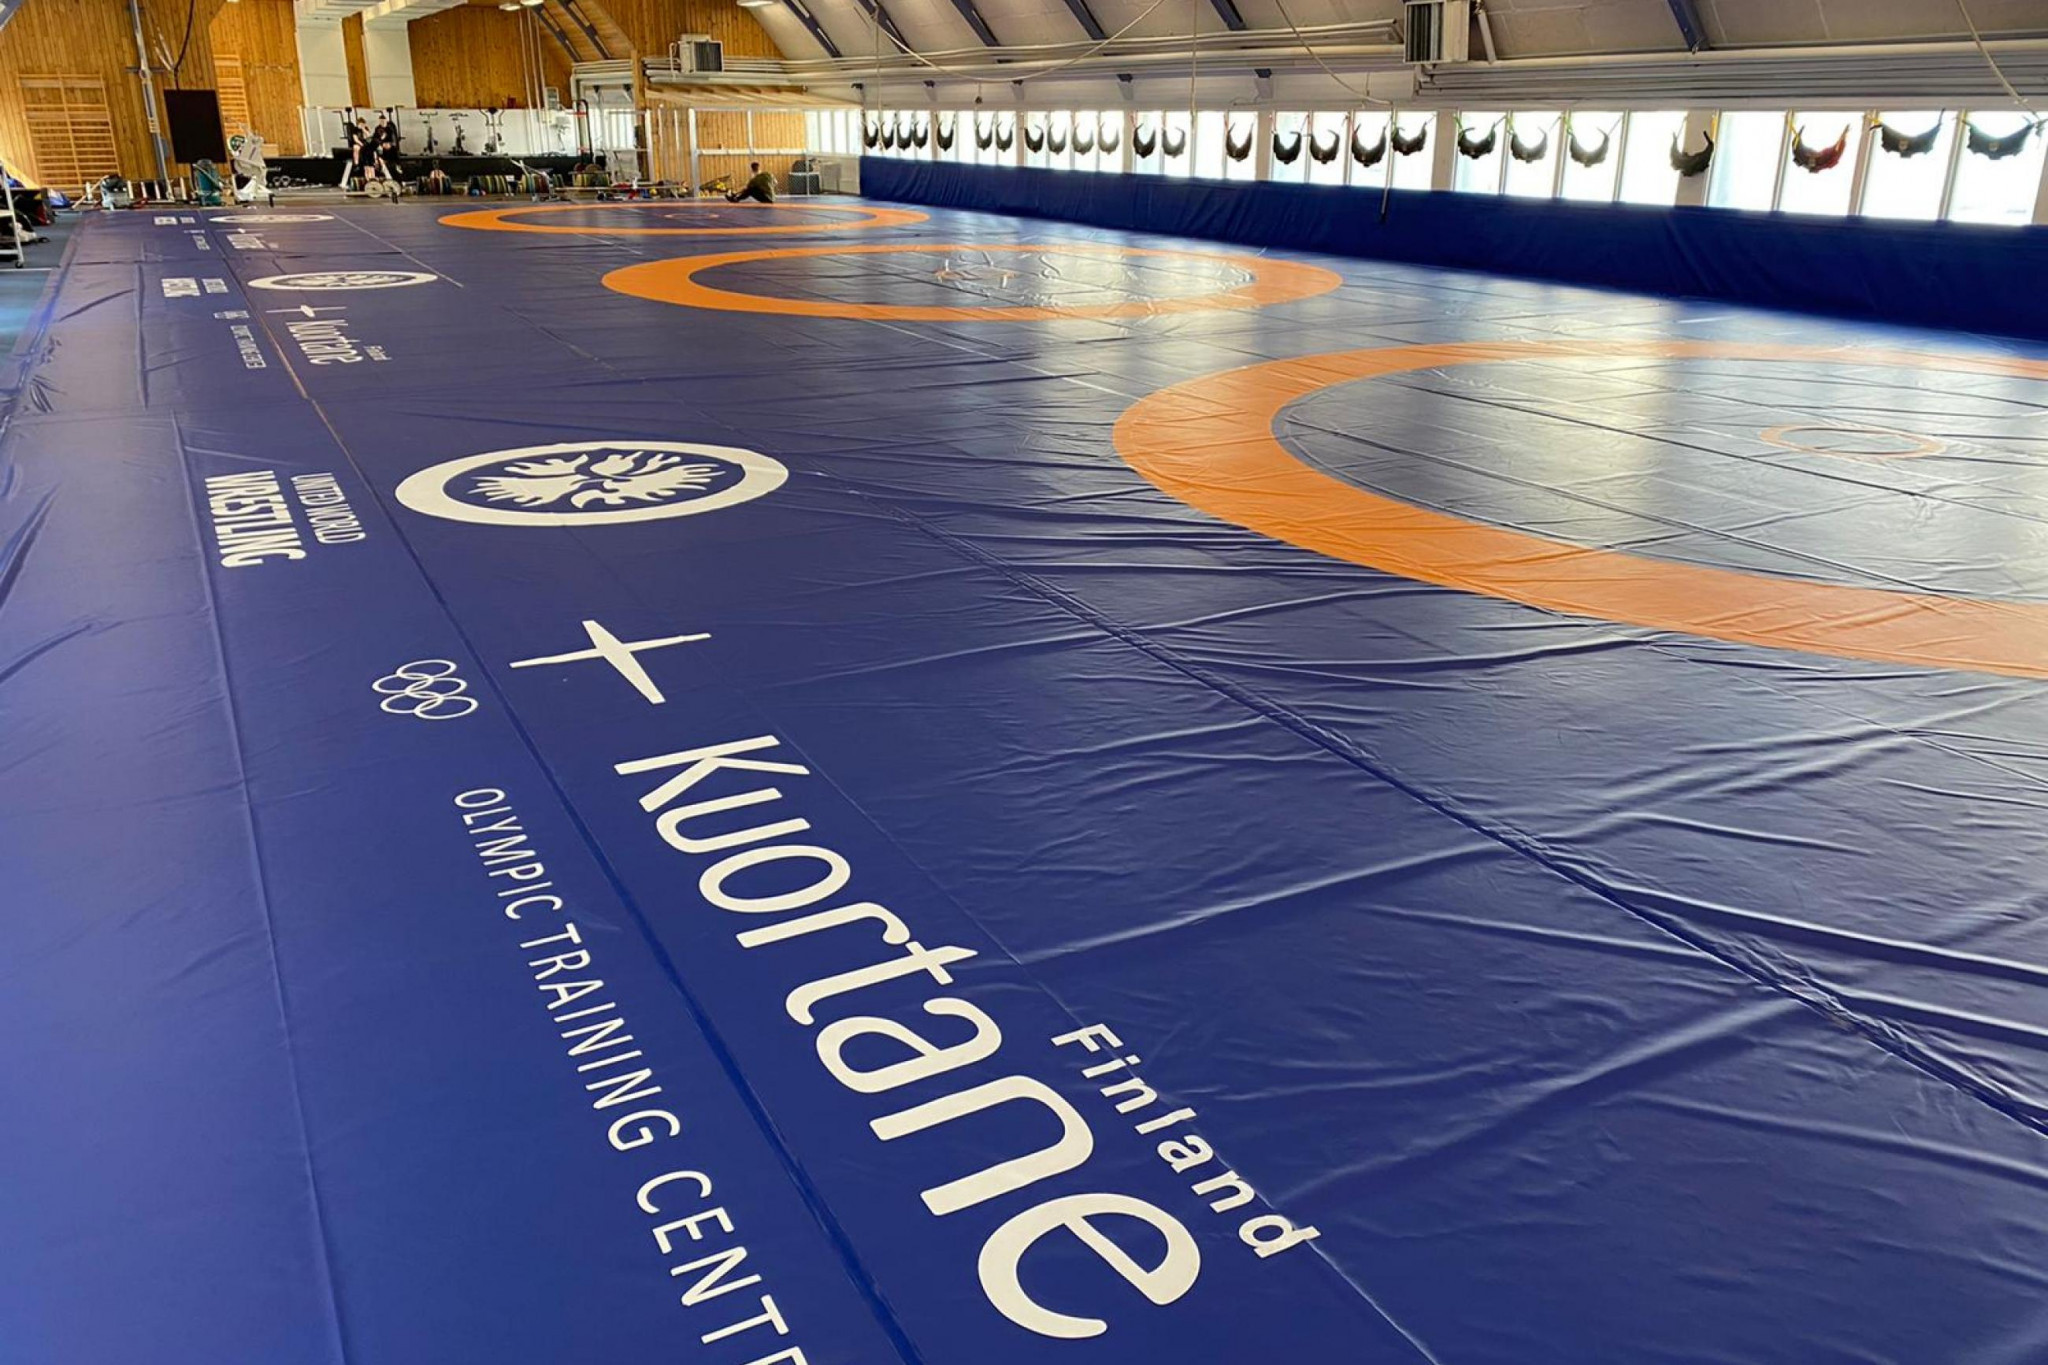 Finnish wrestling training centre completes expansion